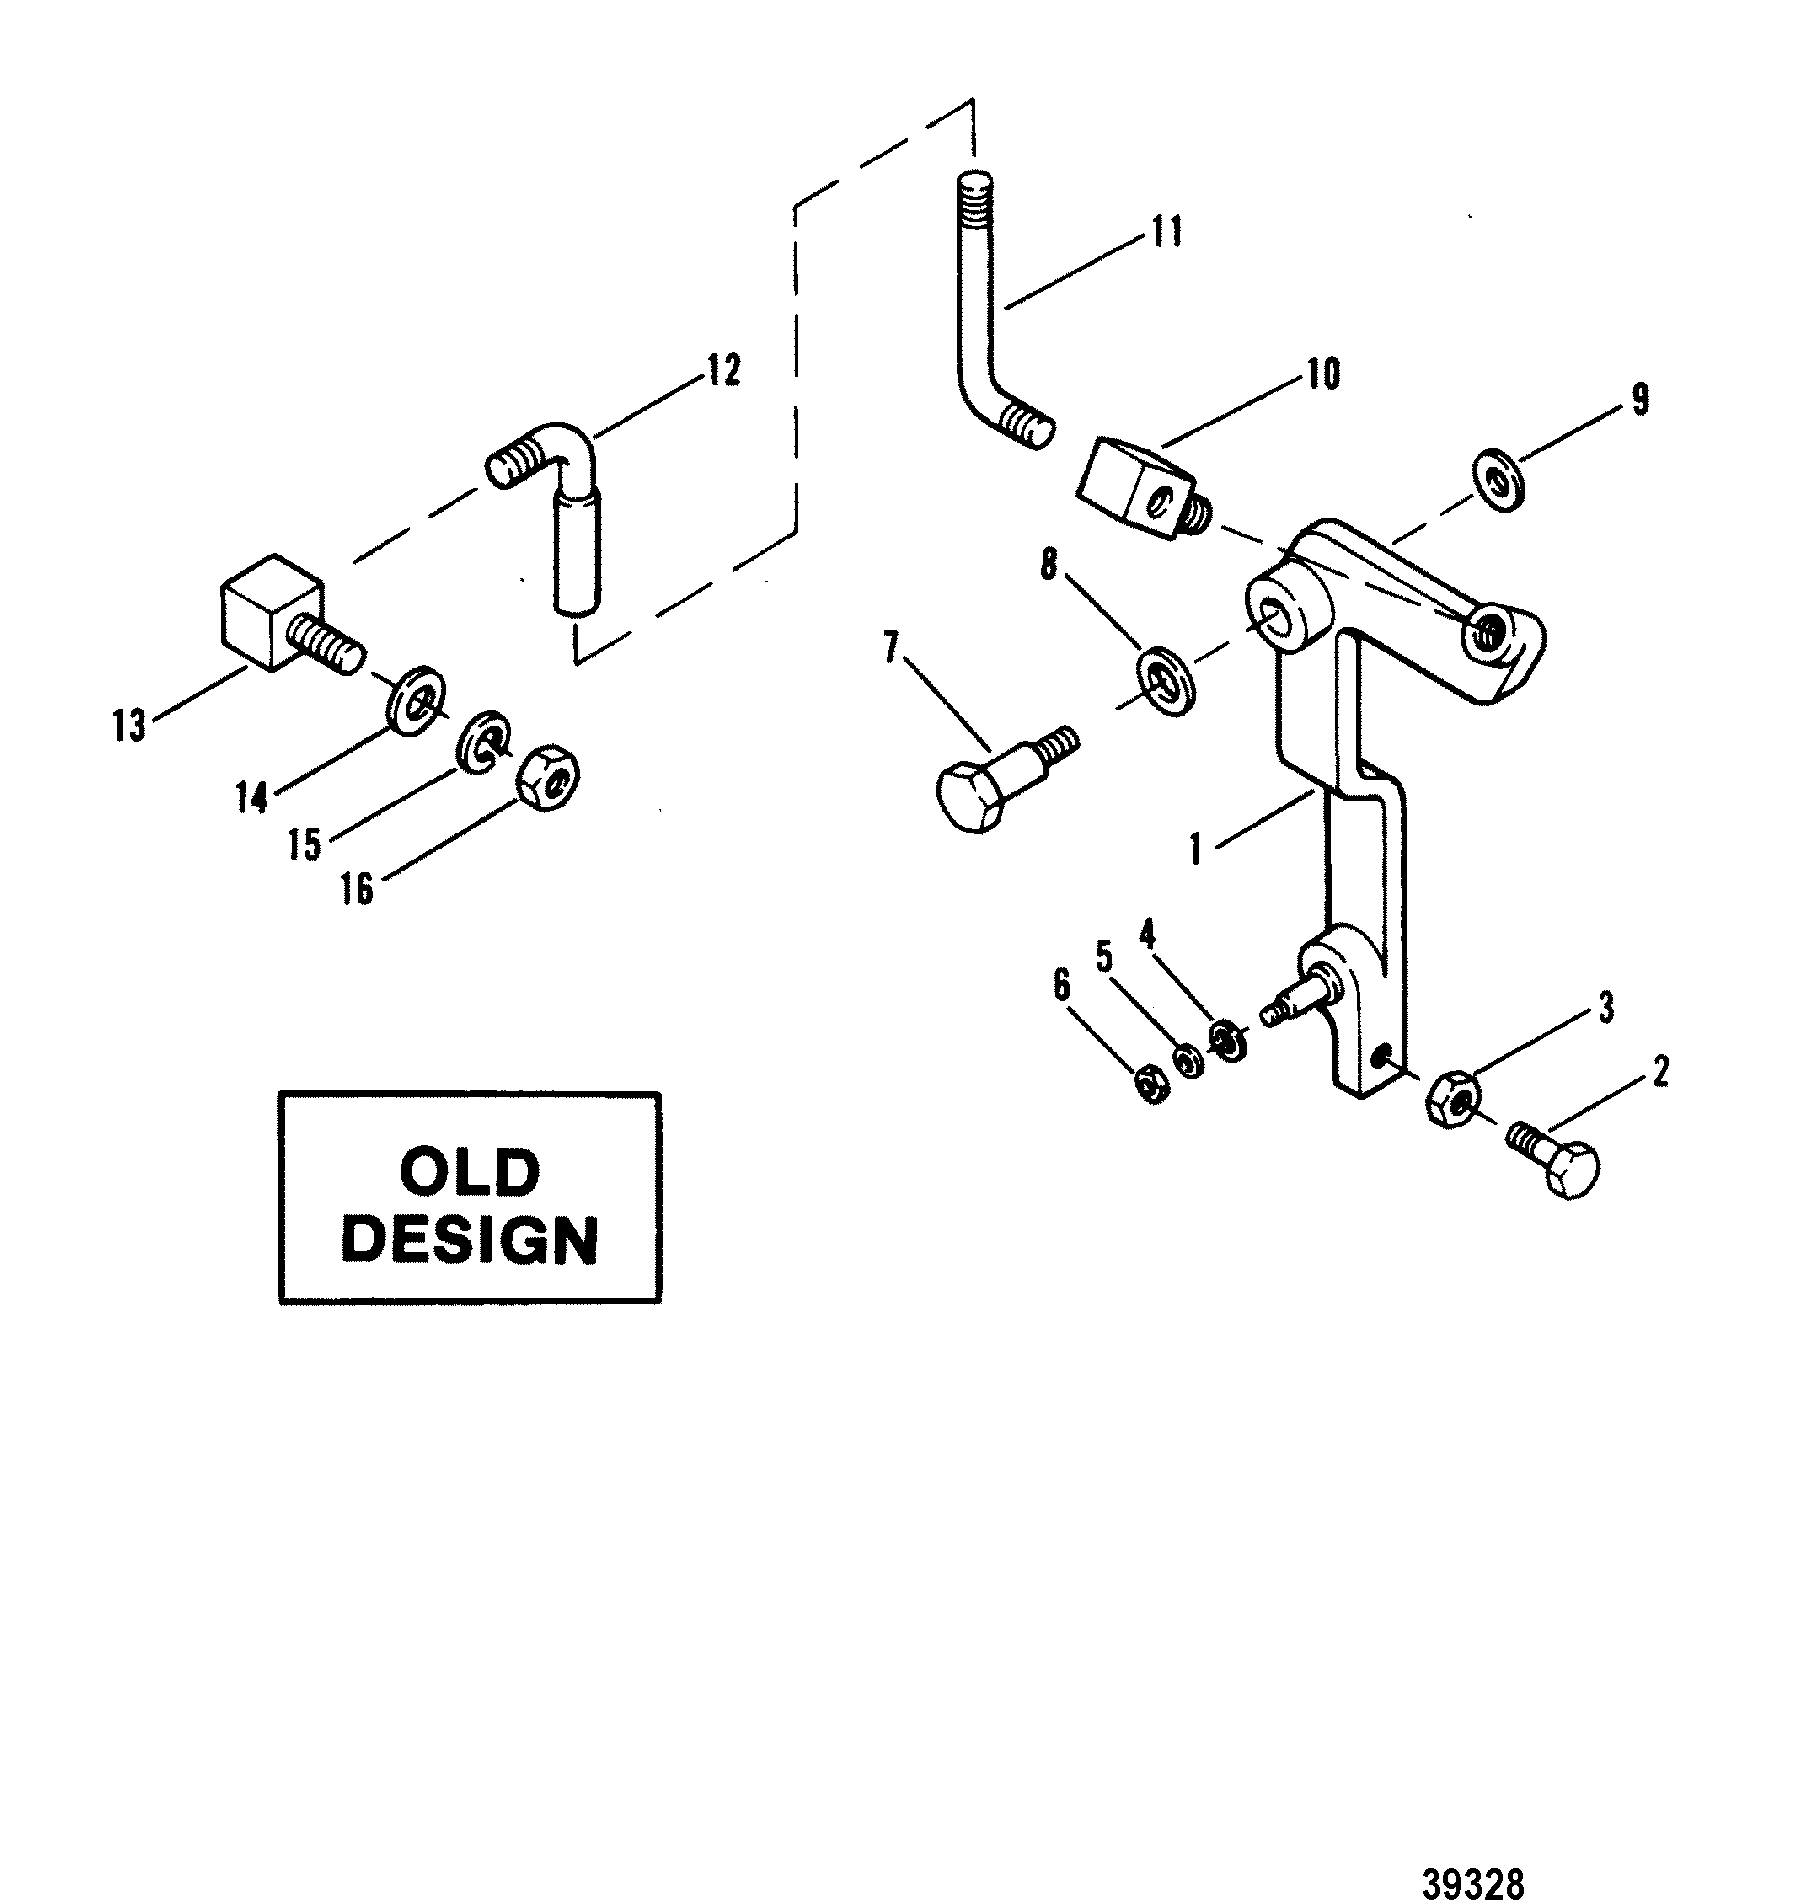 THROTTLE COMPONENTS(OLD DESIGN)